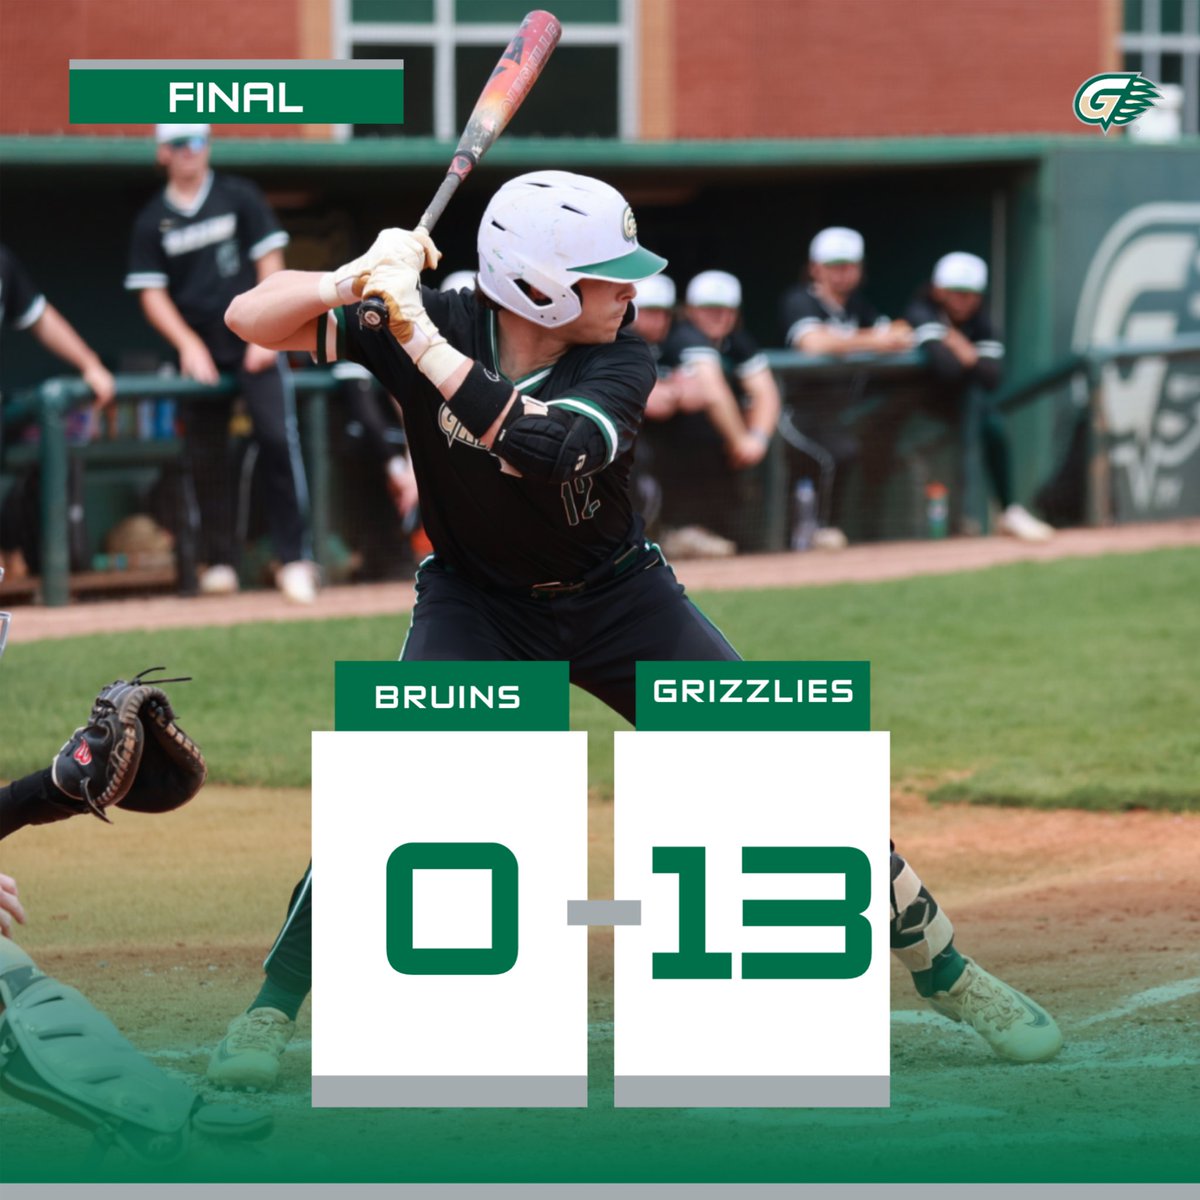 ENDING WITH A SWEEP! Grizzlies pick up win No. 44 on the season with a shutout victory. Blaze O’Saben goes 4-for-4 with three RBI and three runs scored. Braxton Meguiar tallied three hits for the home team. #GGCAthletics | #GrizGangGGC